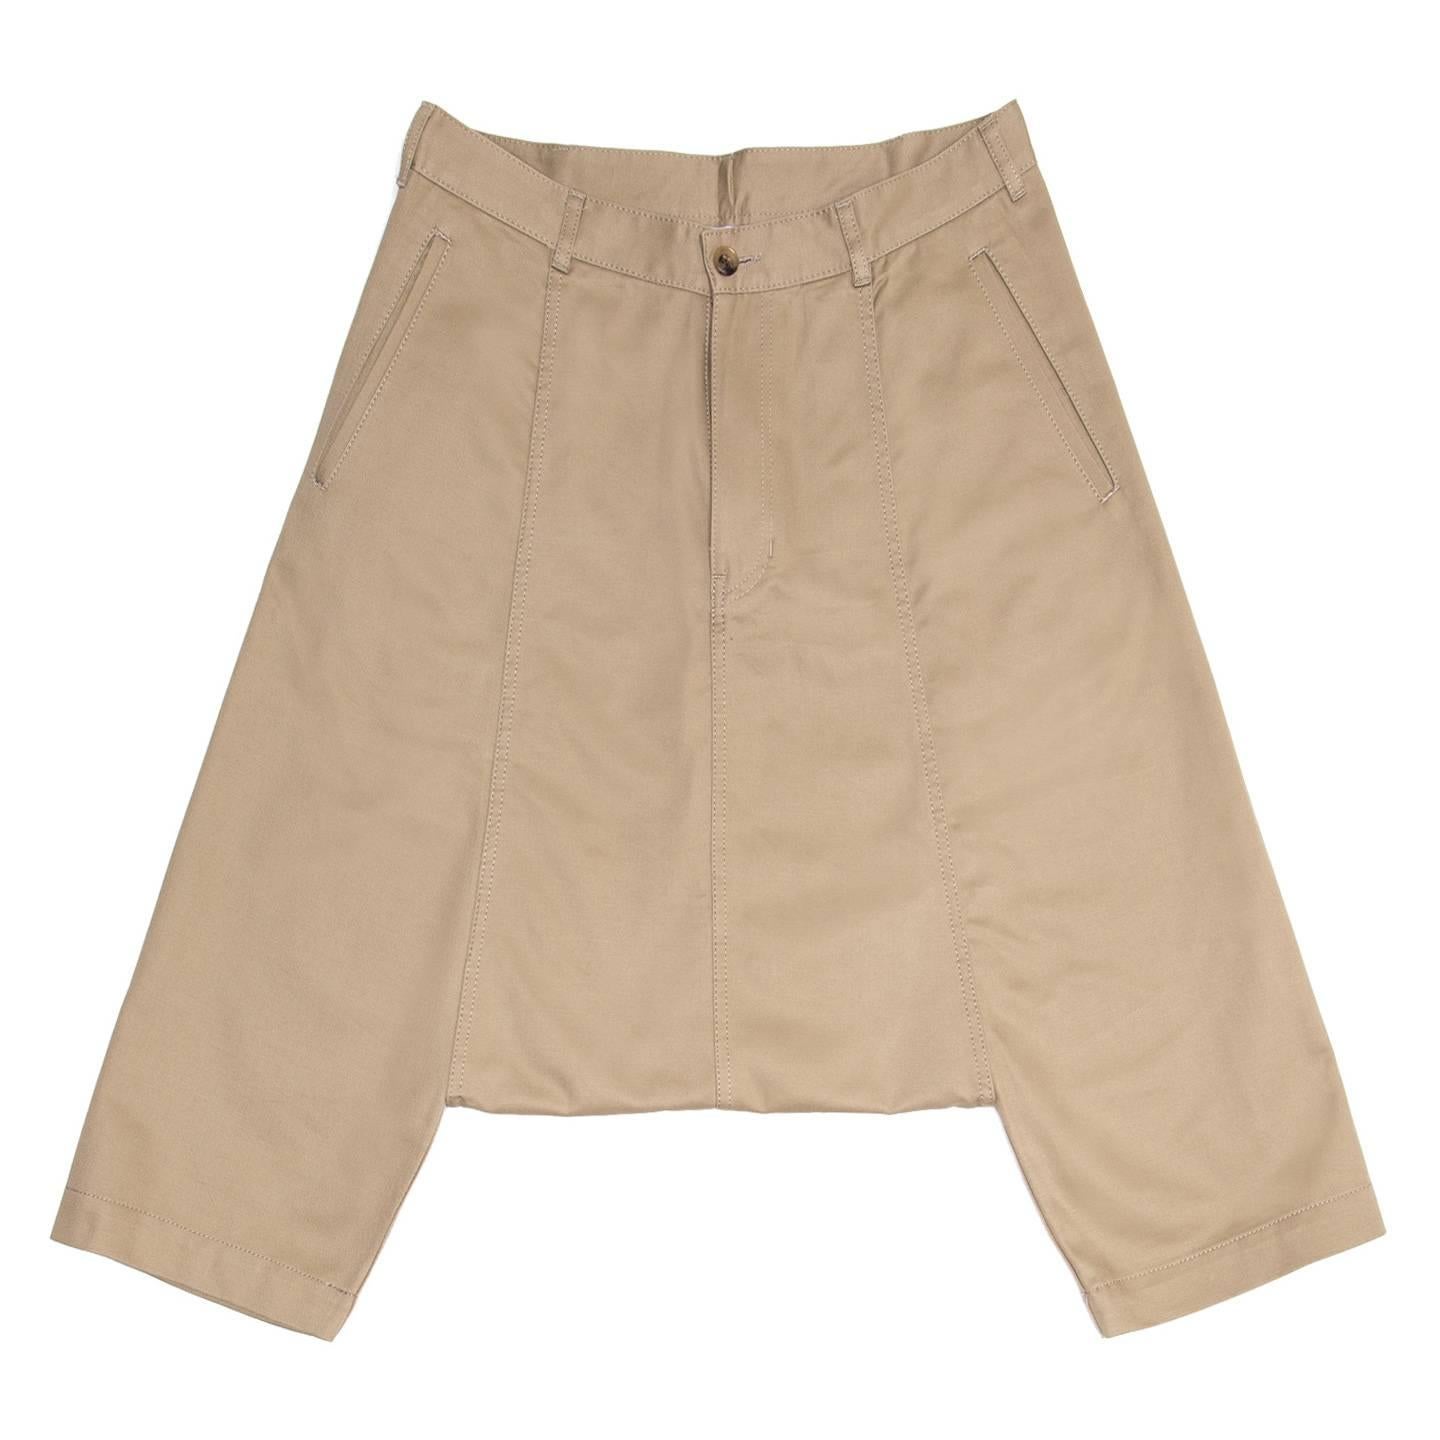 Khaki cotton harem style below knee pants with very low crotch to above knees. The front pockets are classic slit style while at the back the patch pockets are round and wide. All the seams are enriched by tone-on-tone top stitches as well as the